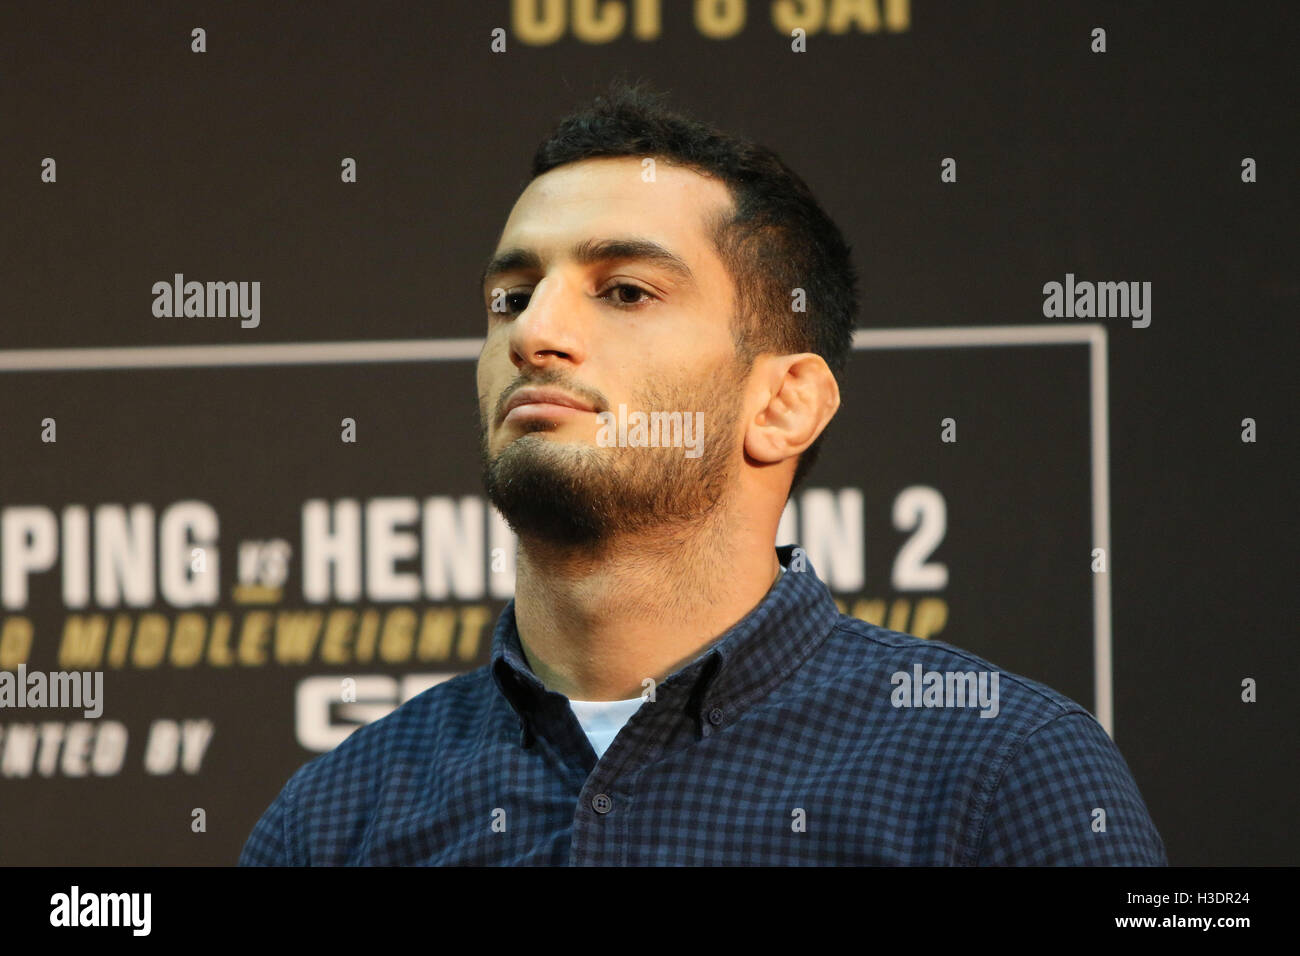 Manchester, UK. 6th October, 2016. UFC 204 - Media Day at Arena Manchester. Thursday the 6 of Oct. 2016. Gegard Mousasi faces th media ahead of UFC 204.   Credit:  Dan Cooke/Alamy Live News Stock Photo